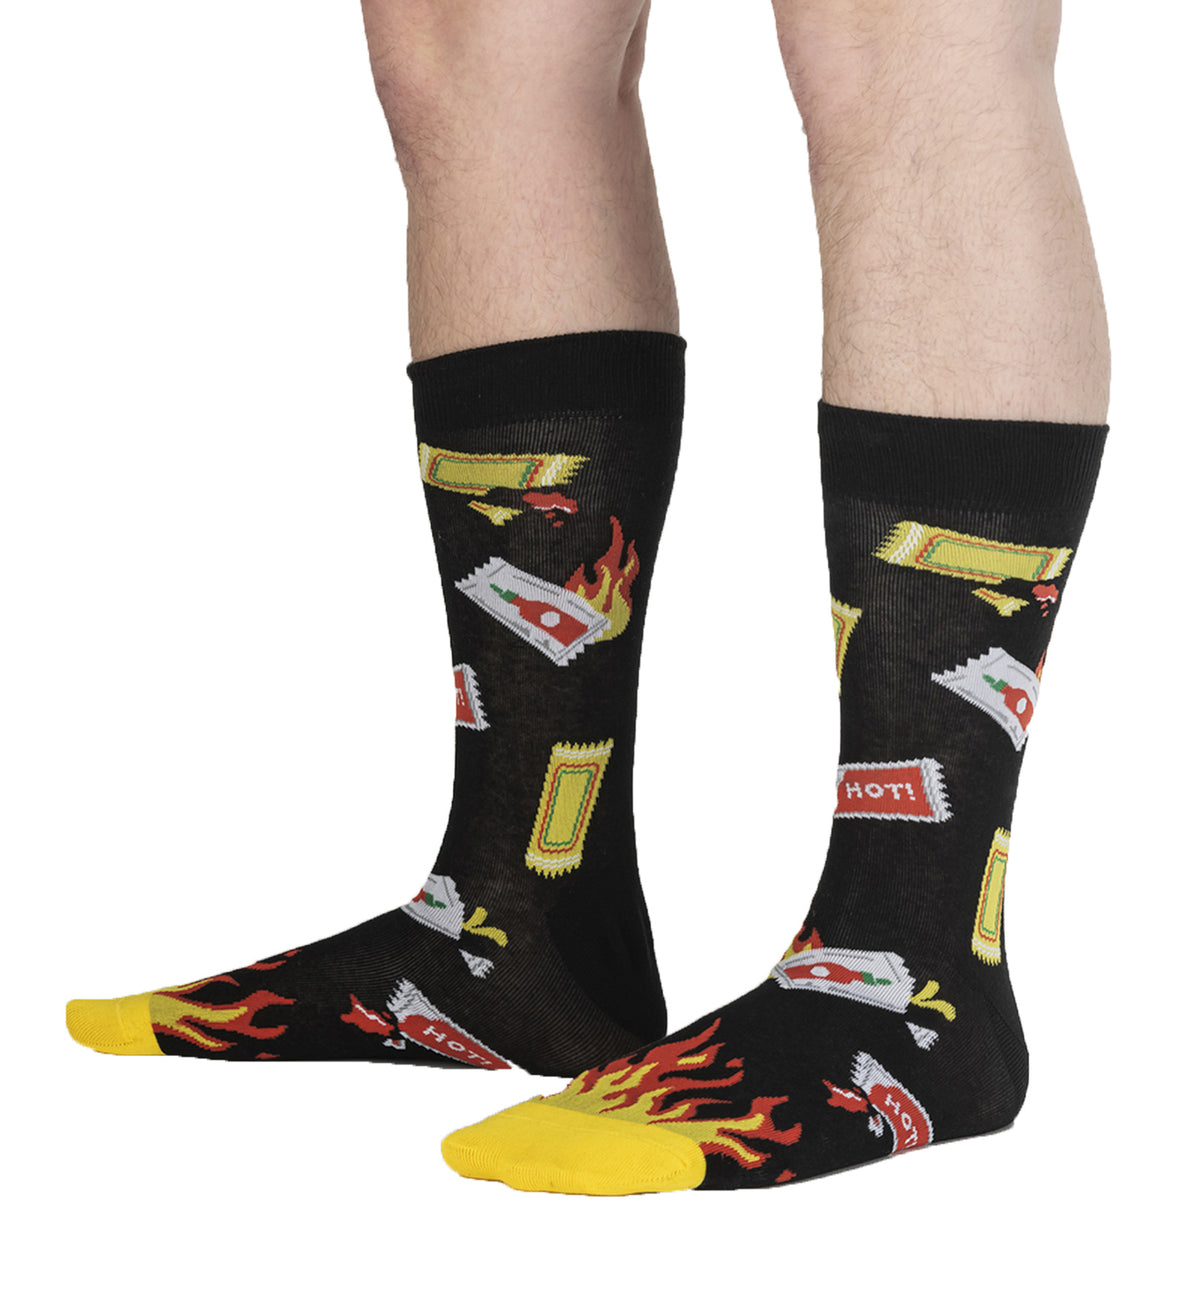 SOCK it to me Men&#39;s Crew Socks (MEF0622),Extra Hot - Extra Hot,One Size